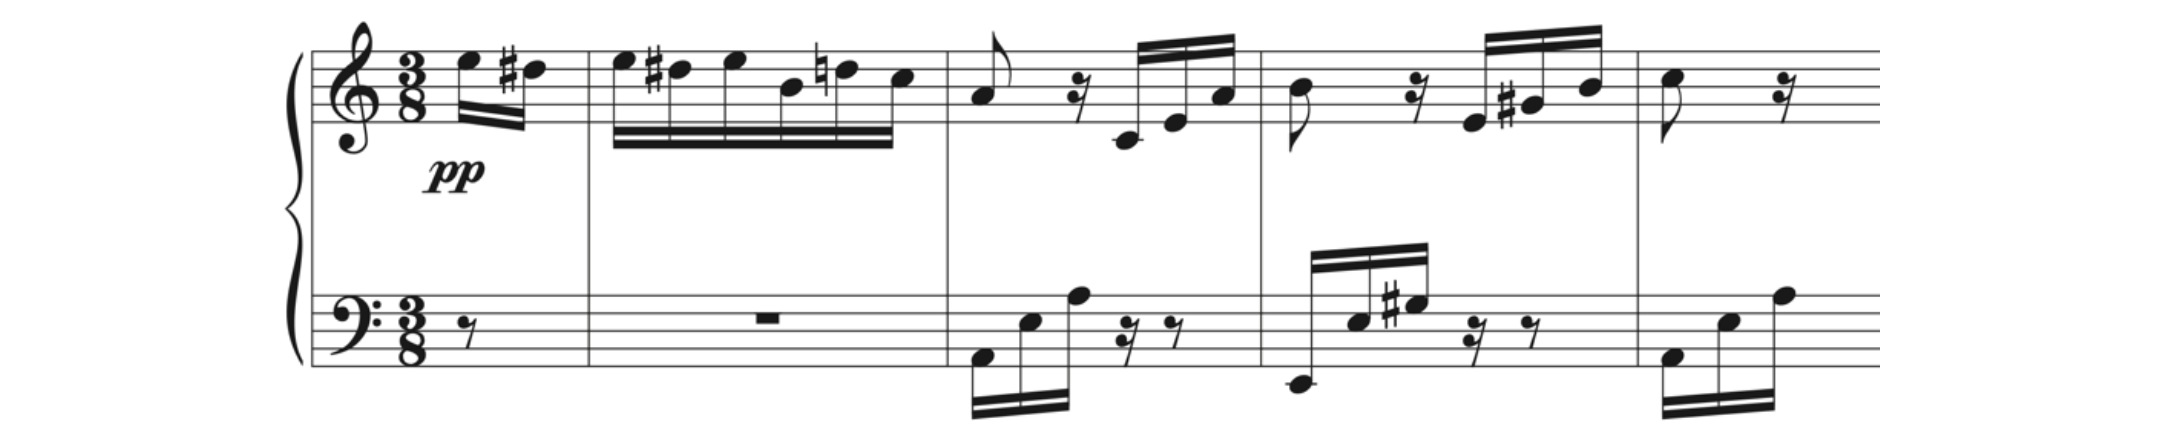 Music for opening of Beethoven's "Für Elise" is an example of the grand staff.